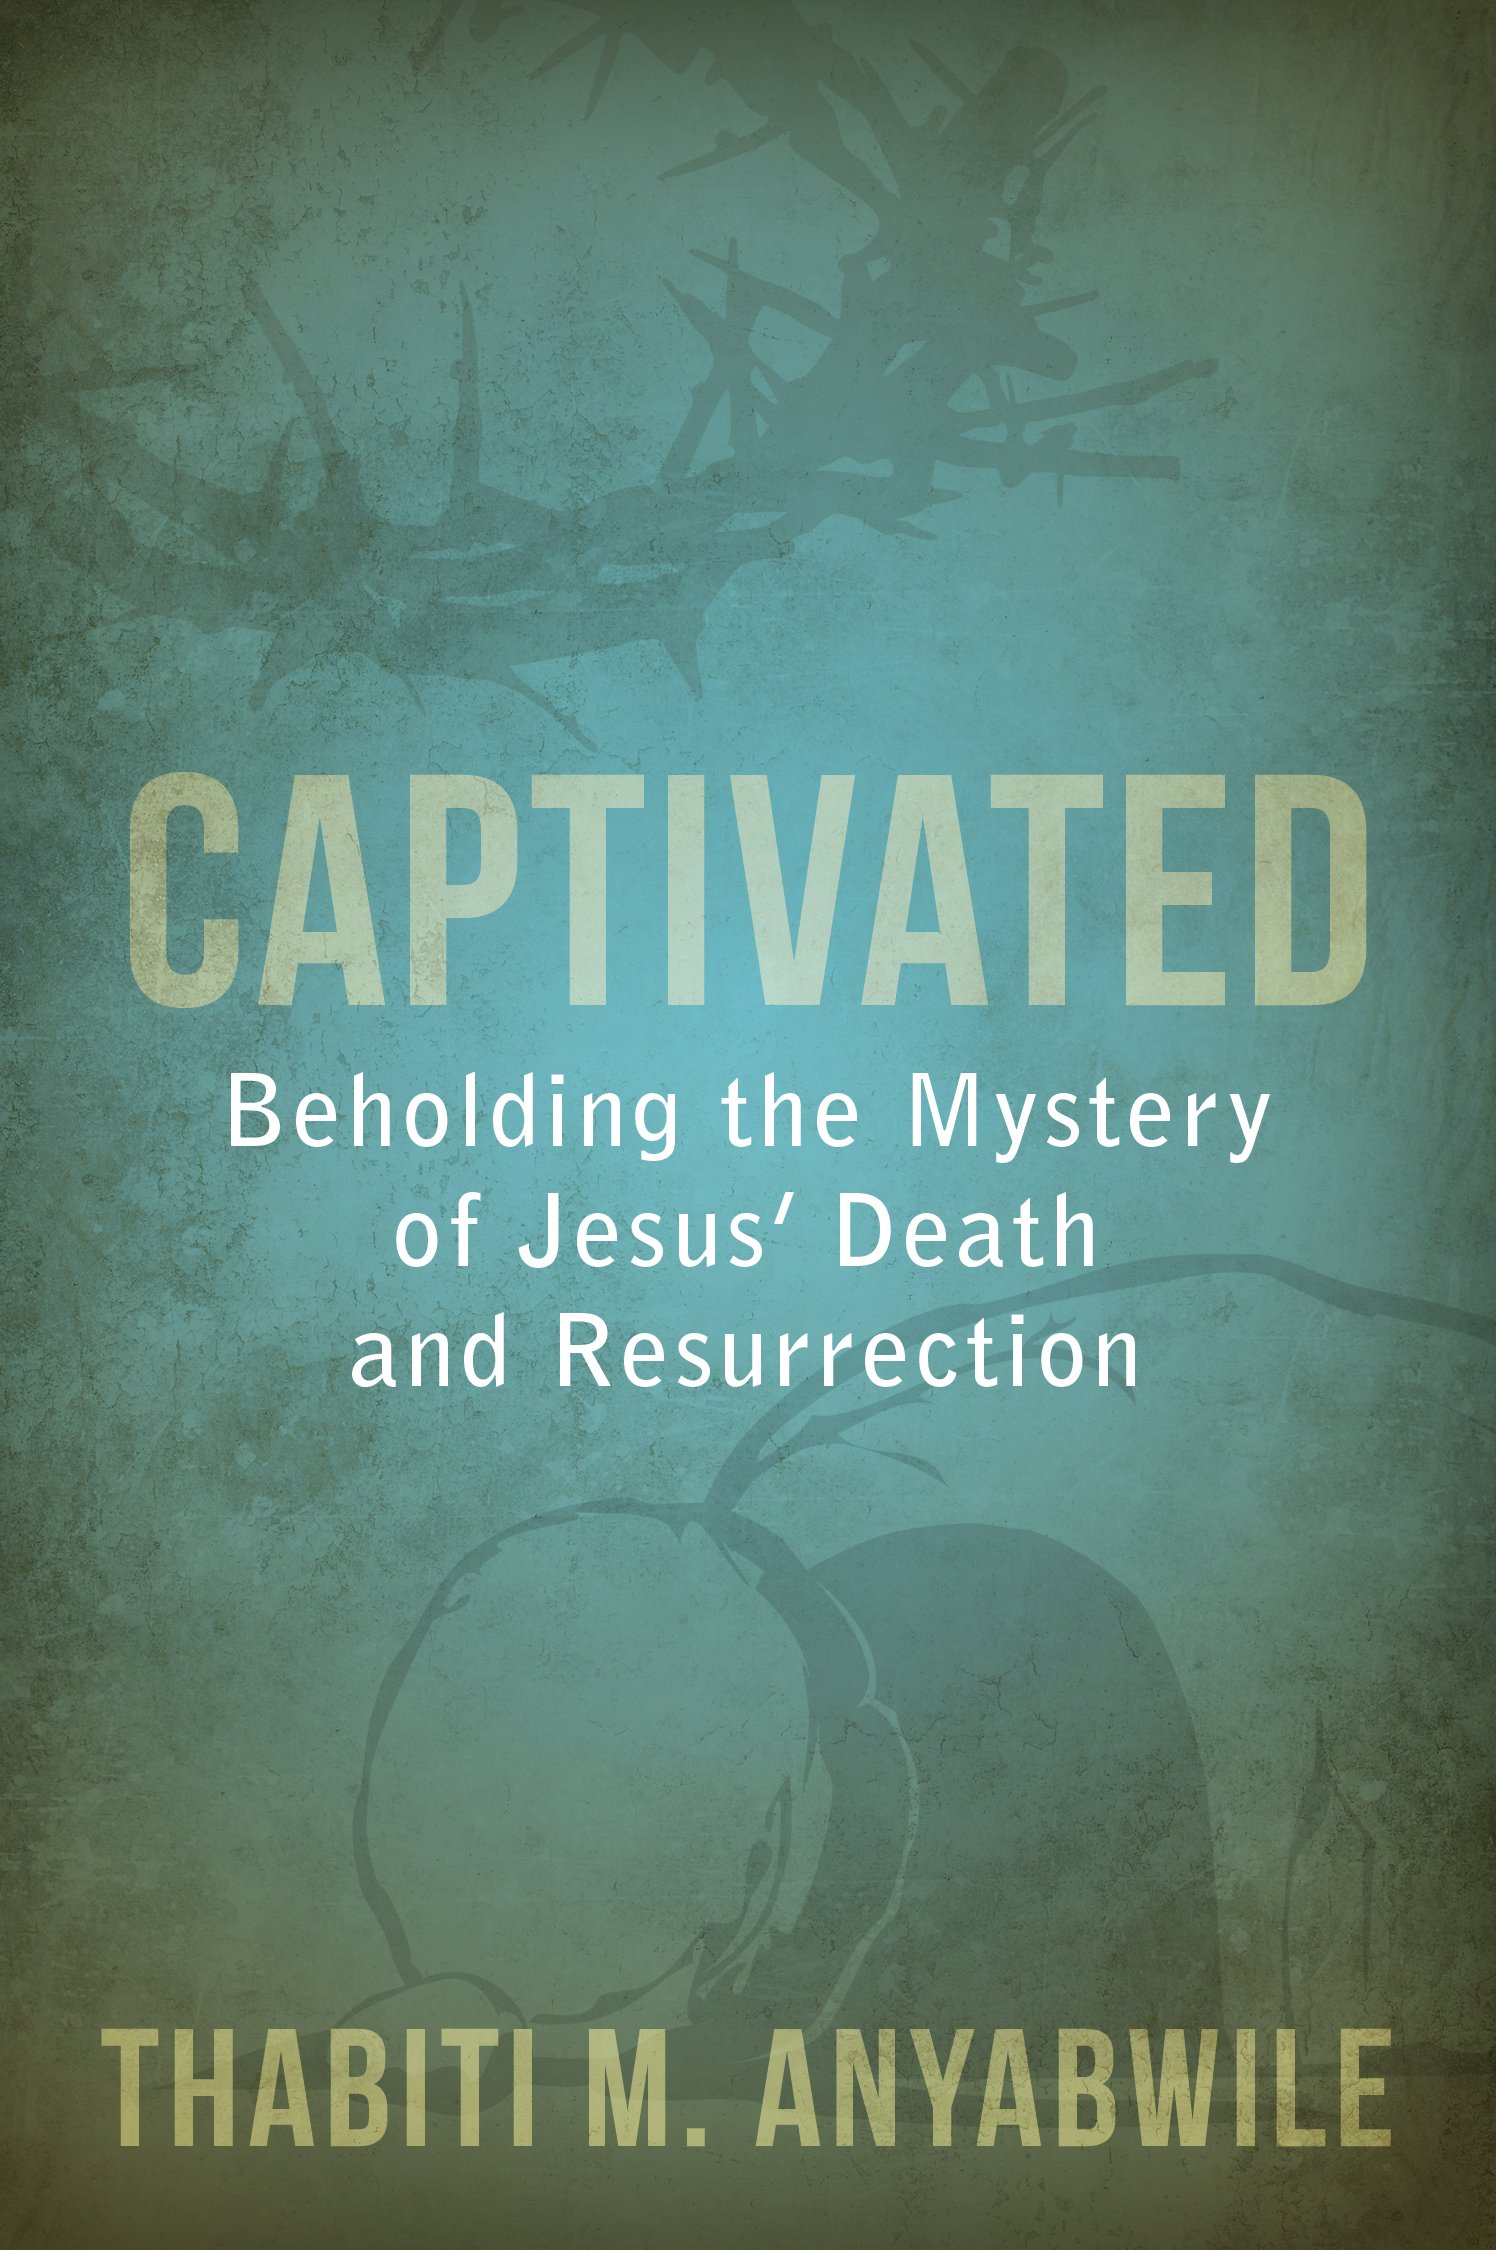 Captivated: Beholding the Mystery of Jesus' Death and Resurrection